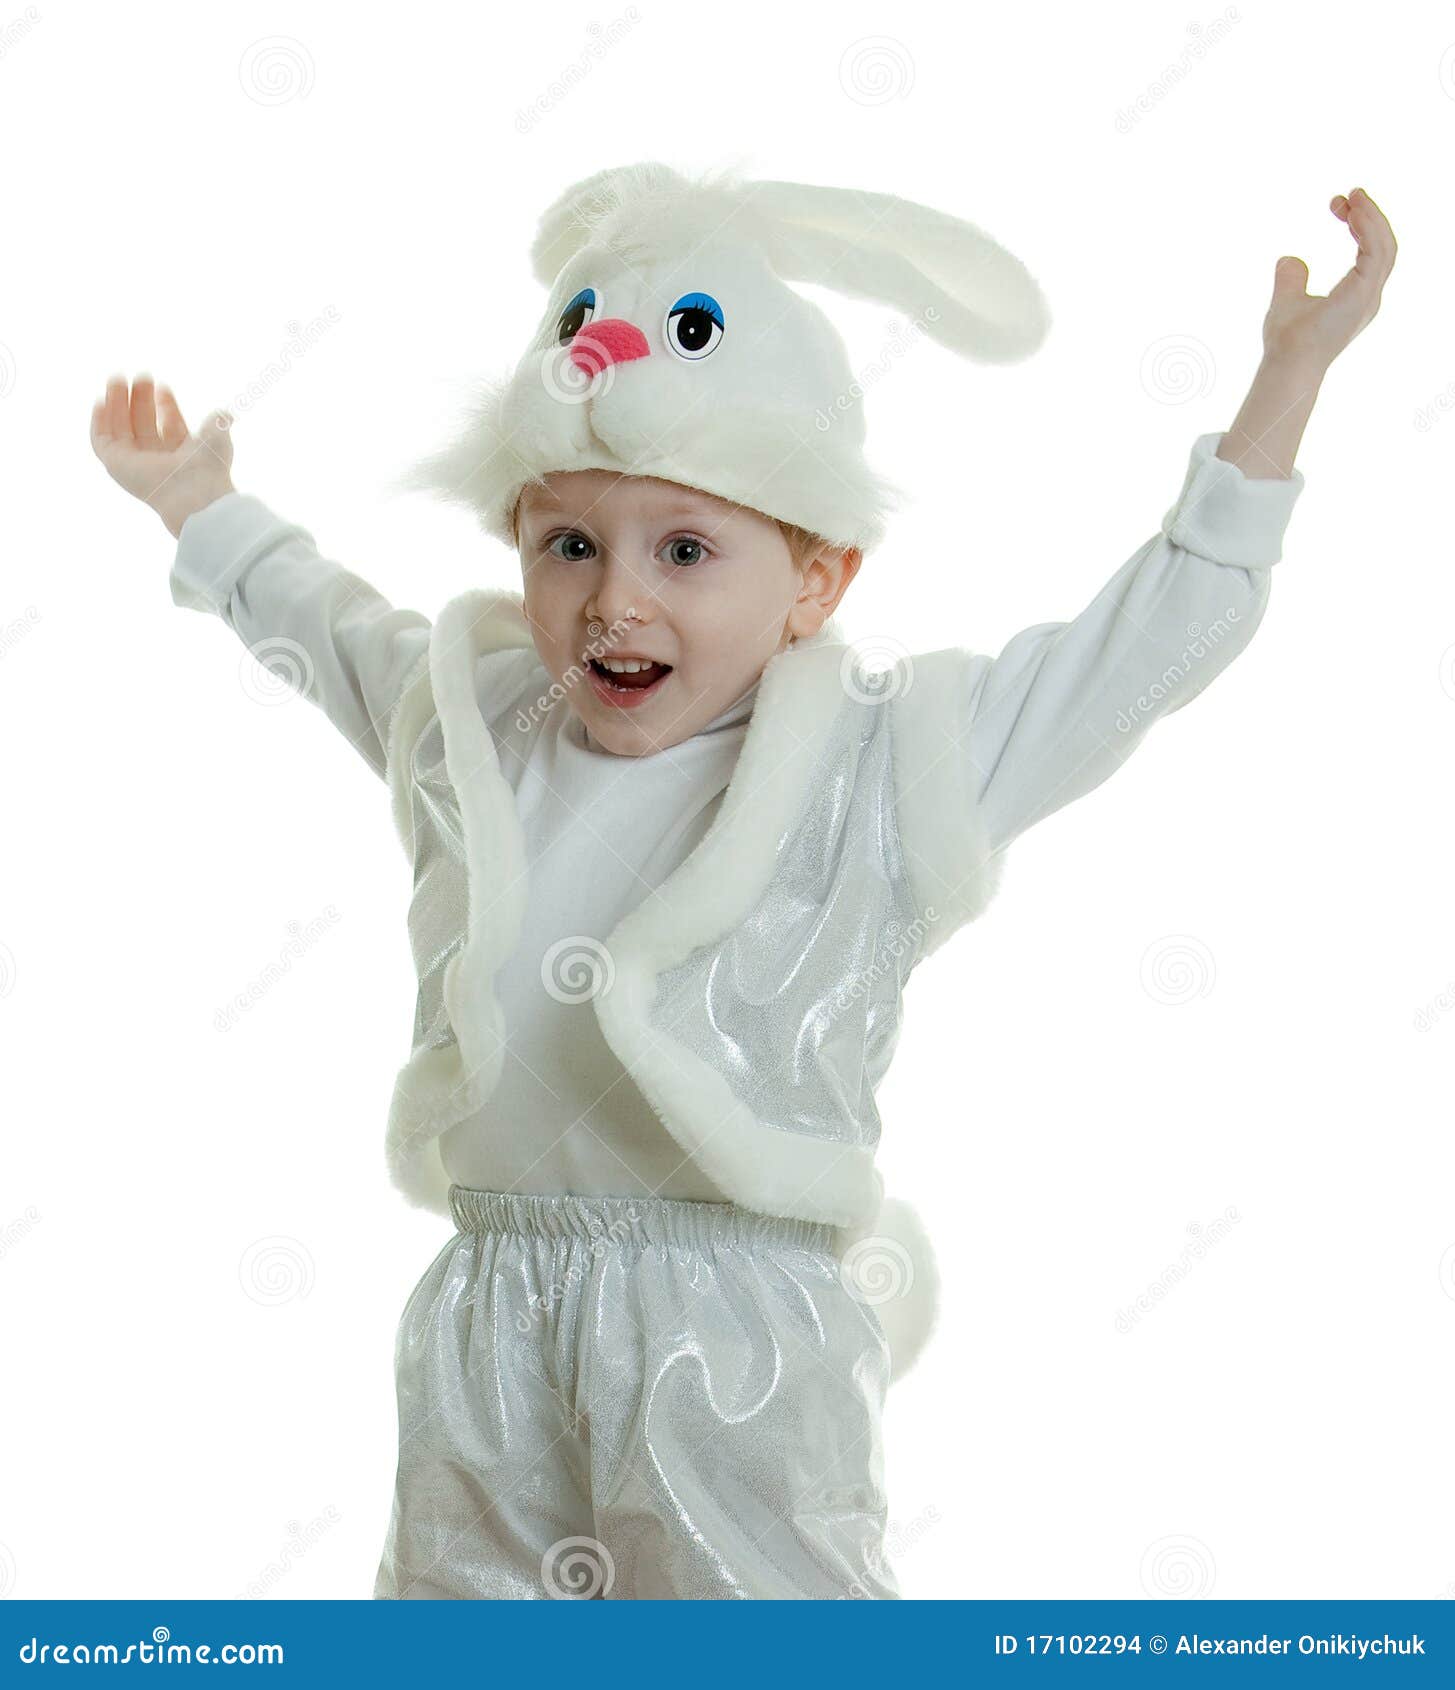 The boy in a suit of a rabbit jumps upwards with the lifted hands